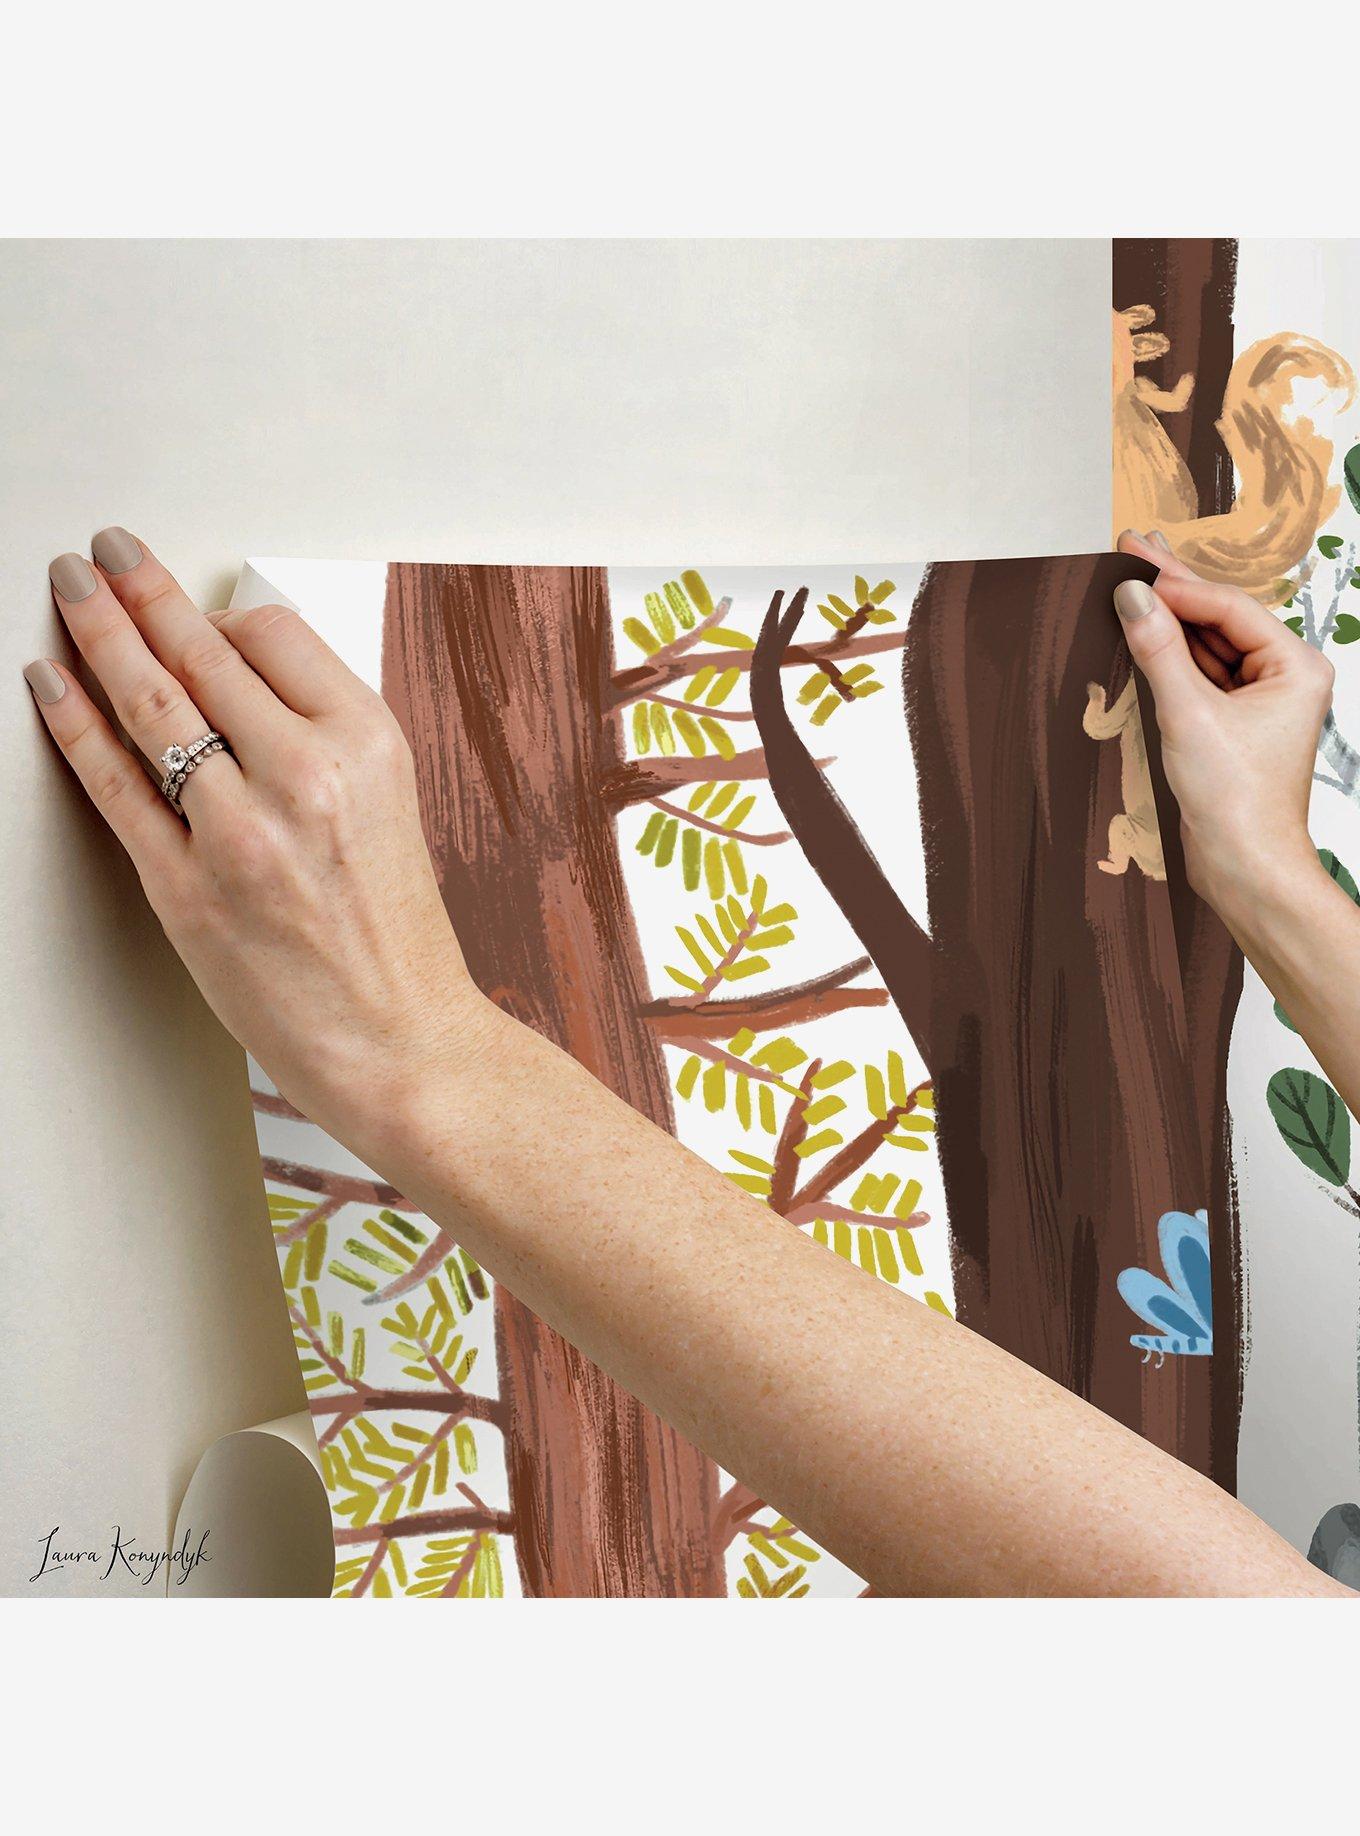 Forest Animal Hide and Seek Peel and Stick Wall Mural